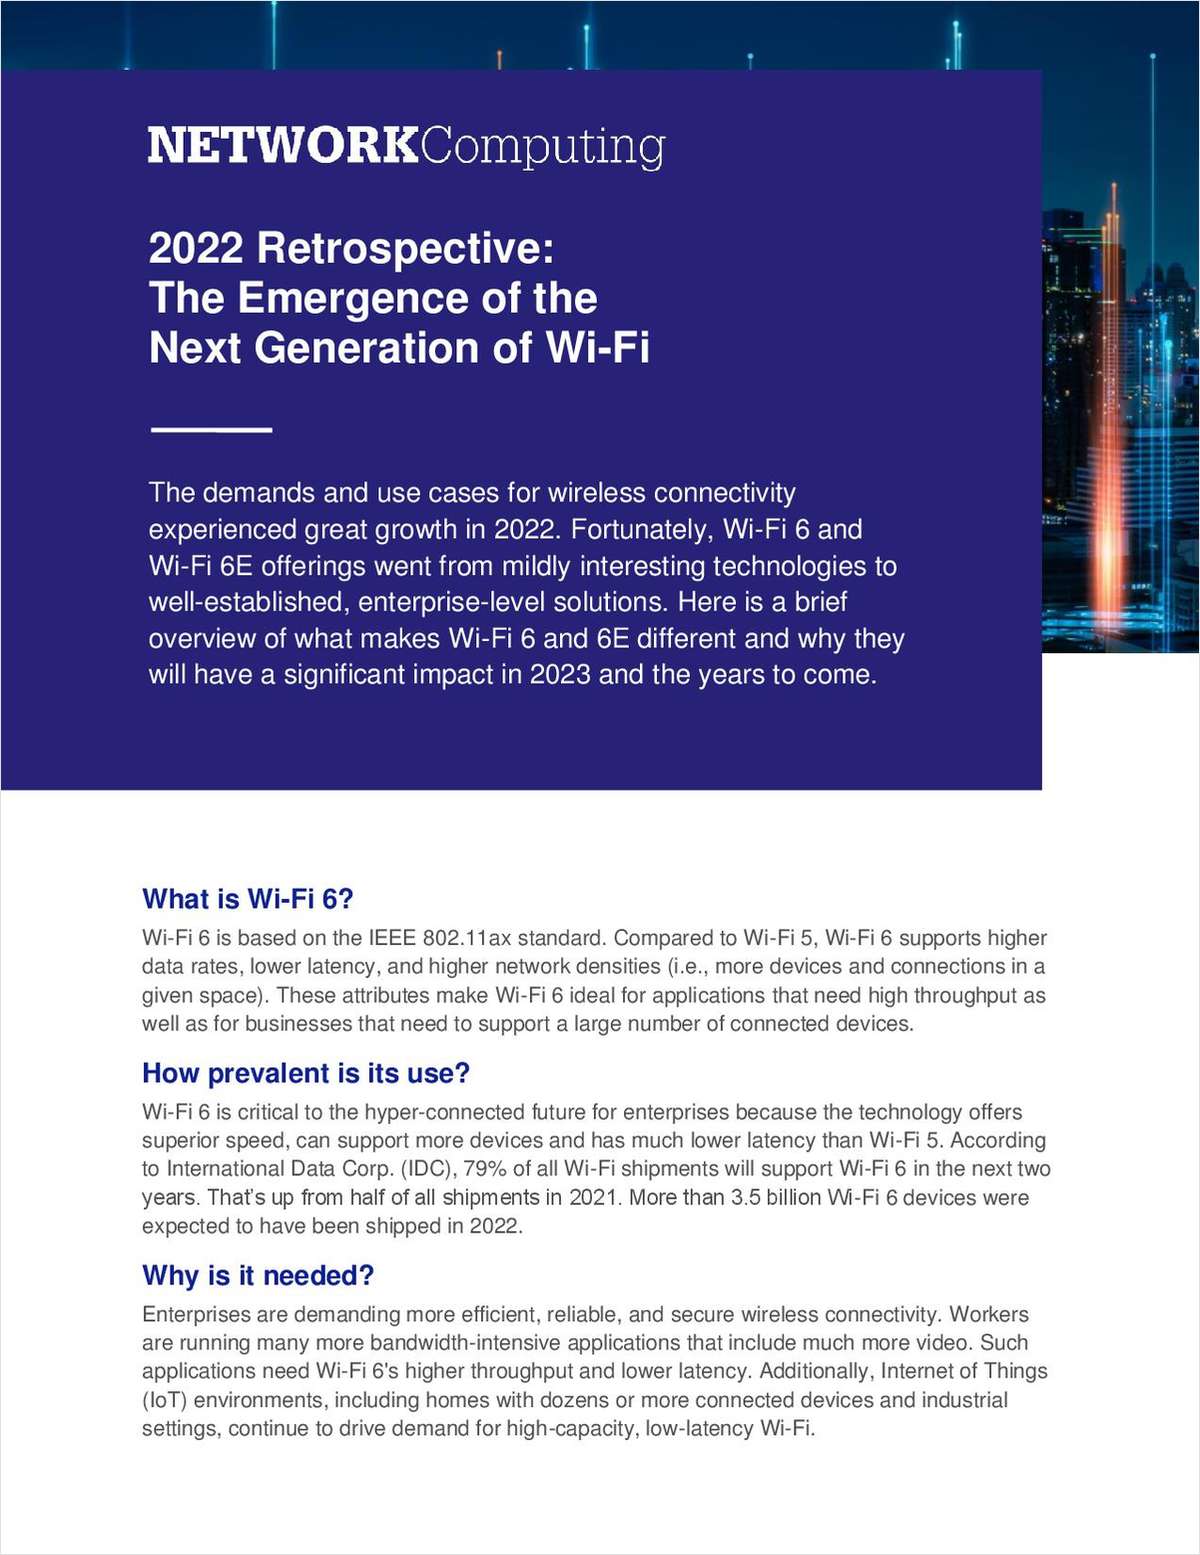 2022 Retrospective: The Emergence of the Next Generation of Wi-Fi